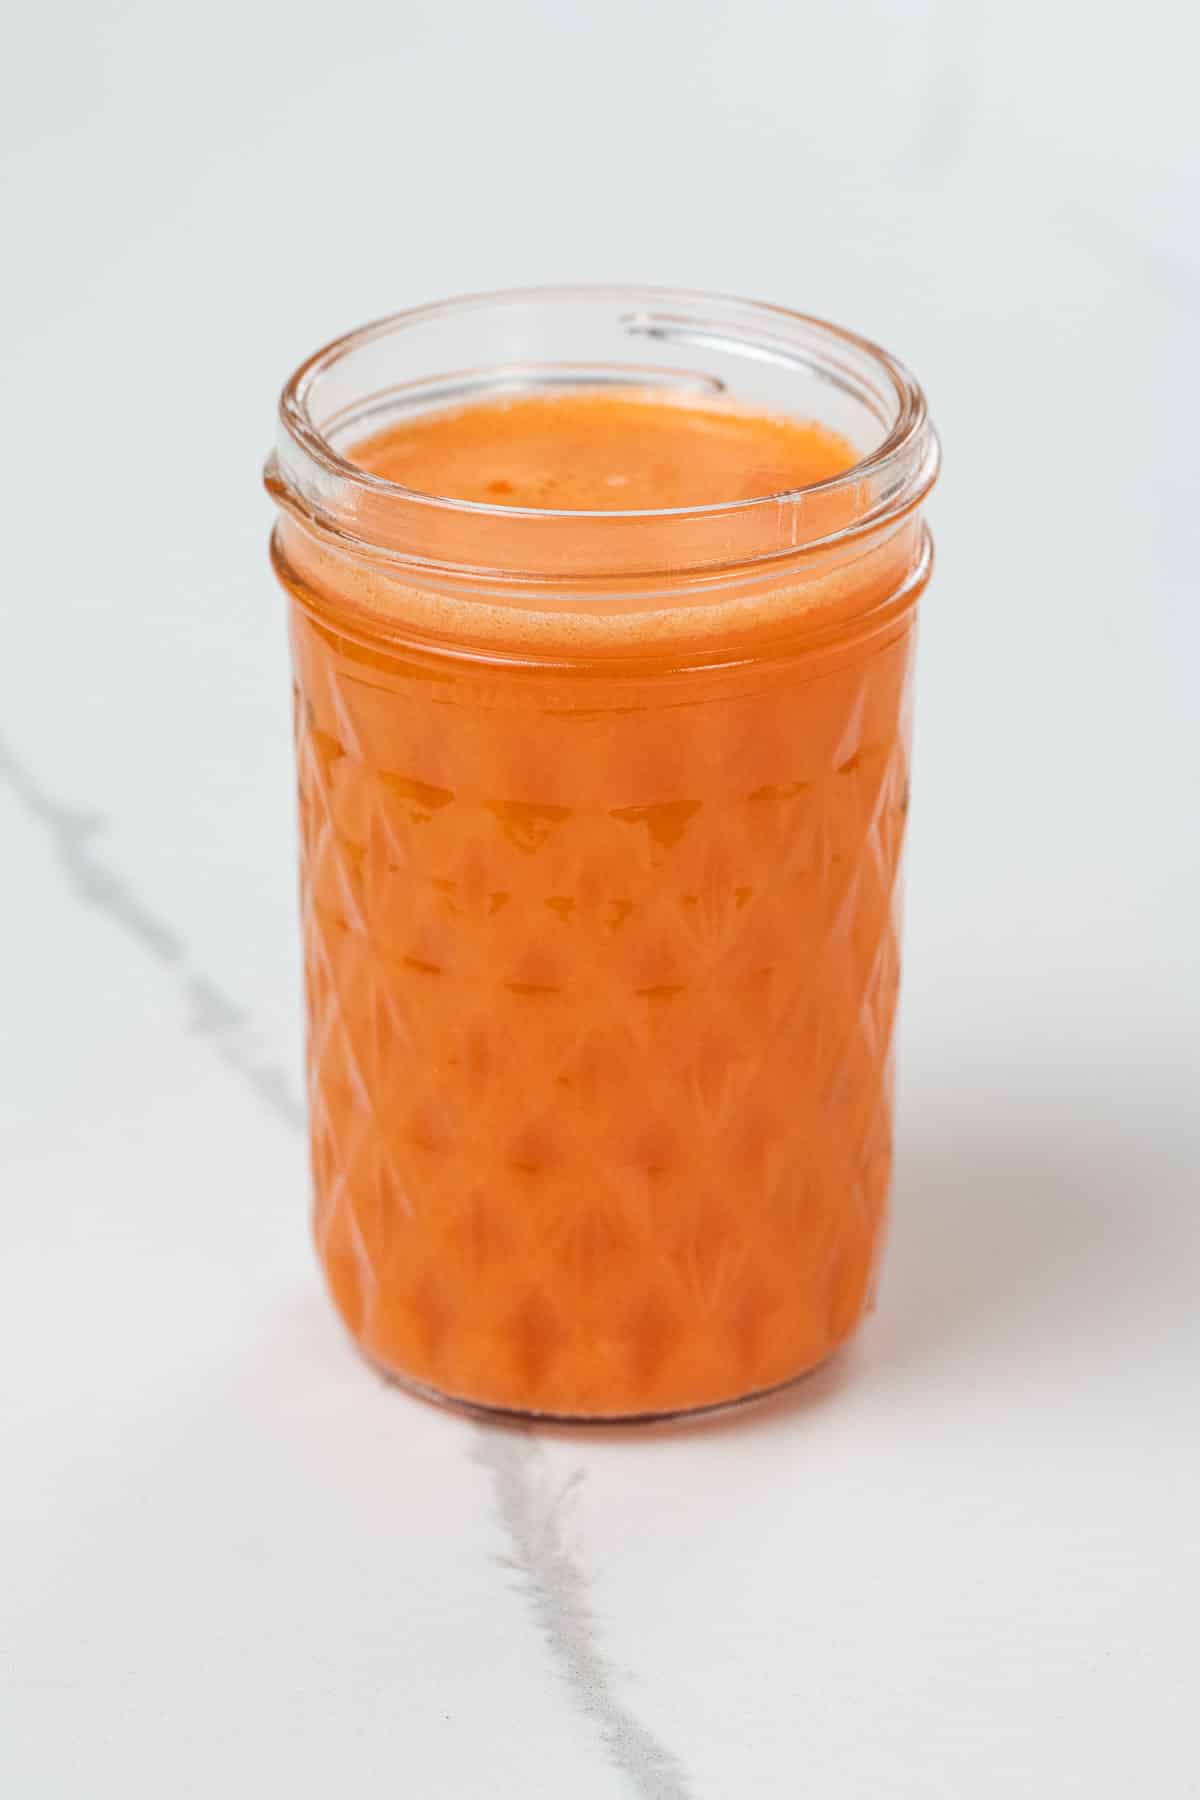 sweet potato, carrot, and orange juice in a small glass